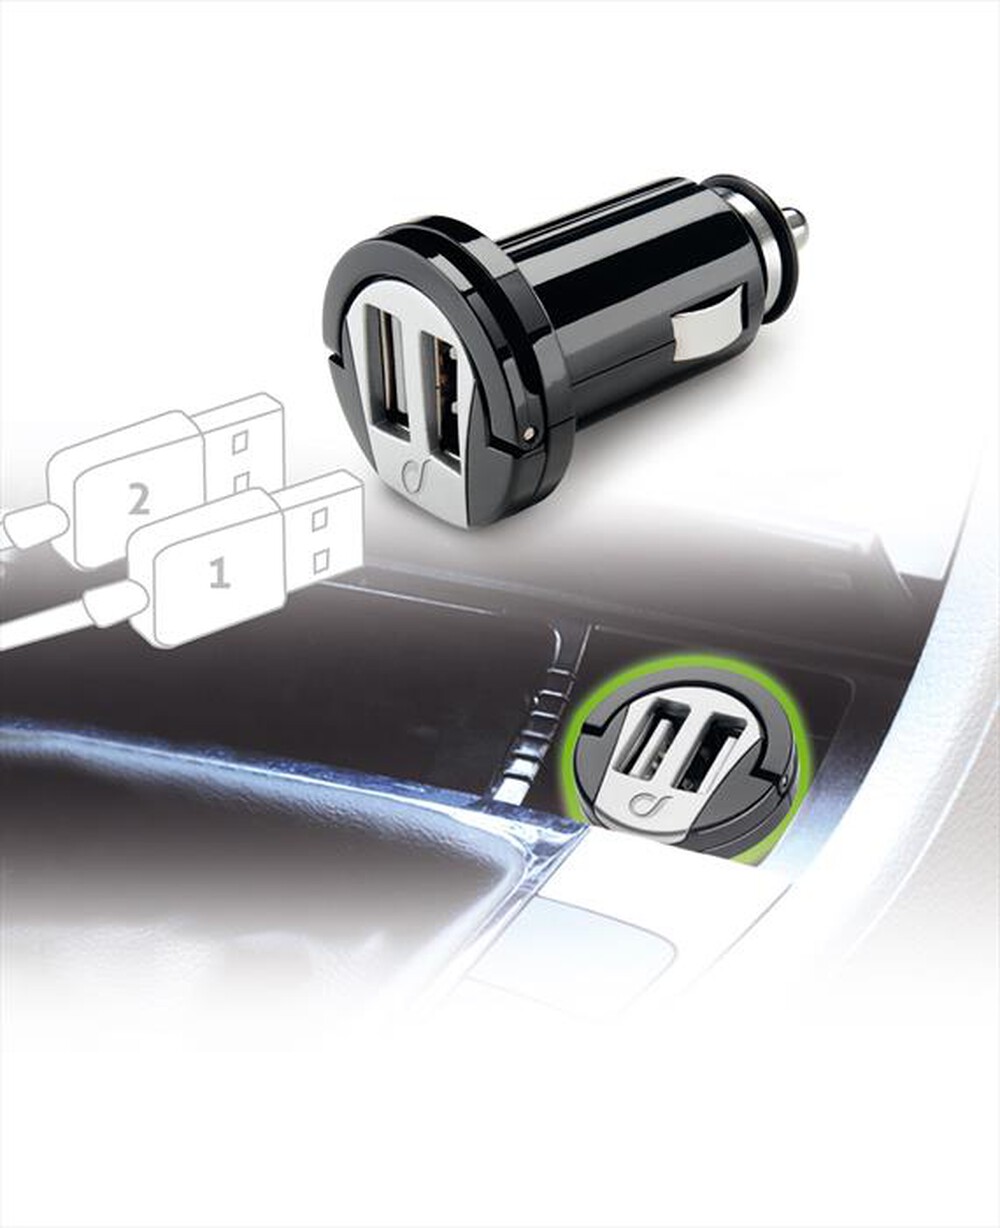 "CELLULARLINE - USB Car Charger Dual - Nero"